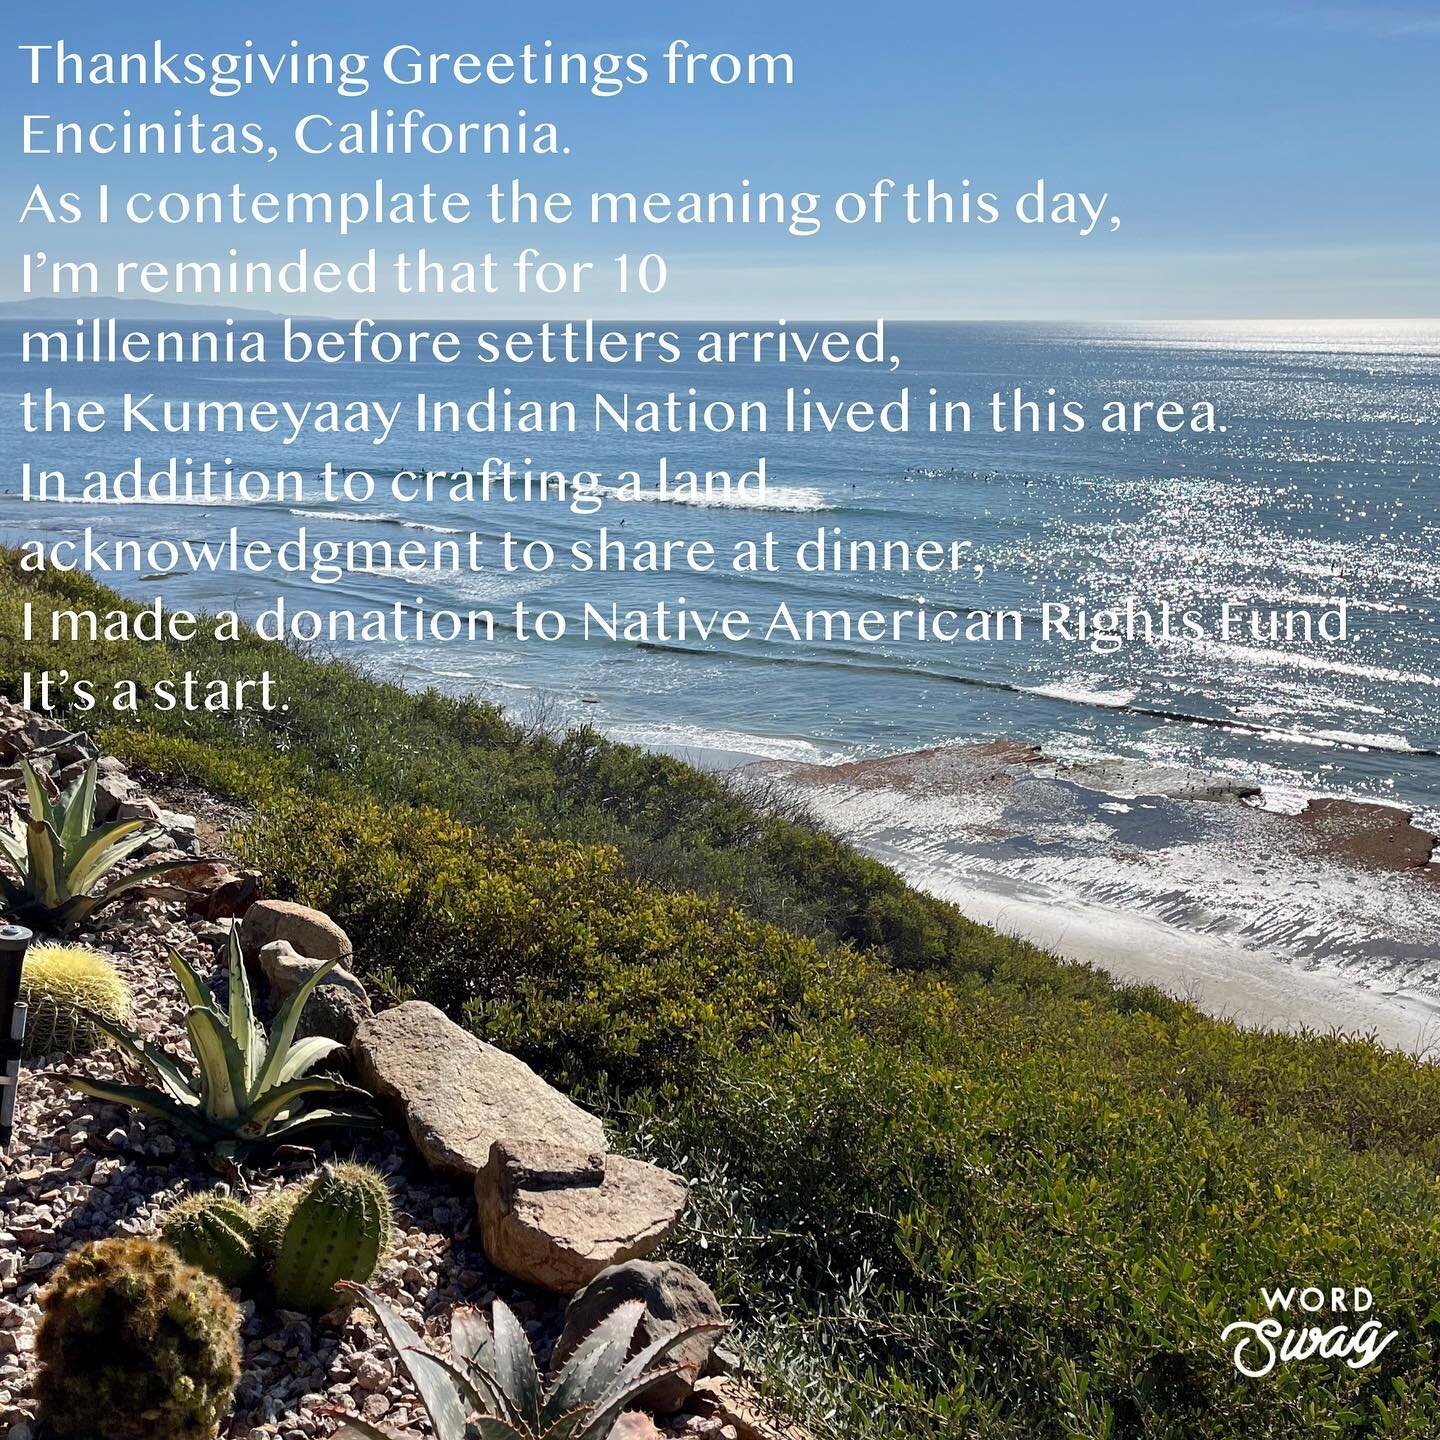 Wishing you and yours a peaceful Thanksgiving Day. 

Yesterday my mom and I visited the meditation gardens of the Self Realization Fellowship in Encinitas. We learned about Yogananda and the temple. Also enjoyed the sounds of waves, birds and ponds. 